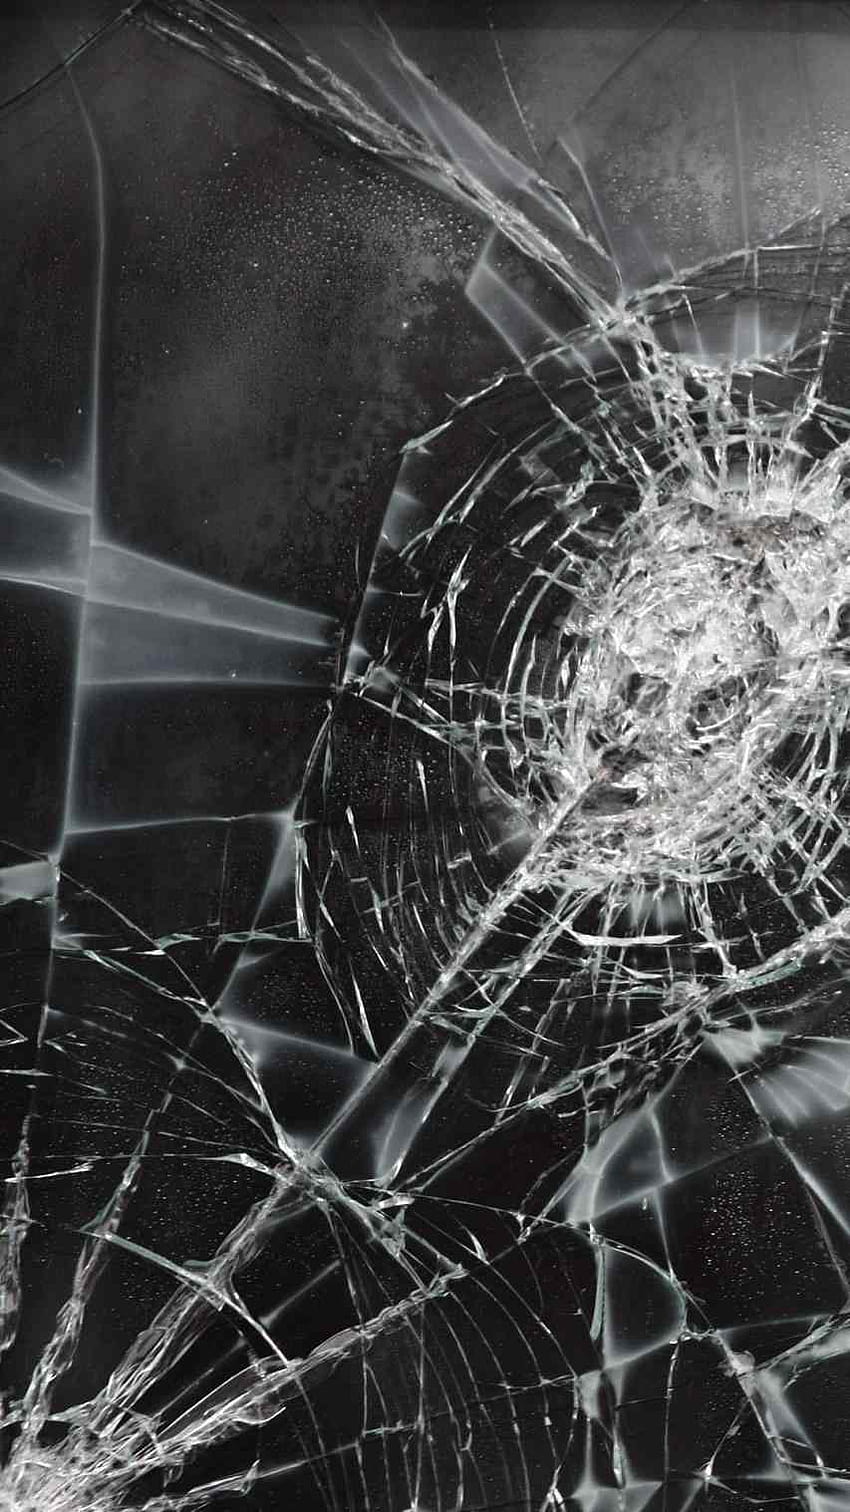 531815 1920x1080 abstract colorful triangle shattered broken glass wallpaper  JPG 595 kB - Rare Gallery HD Wallpapers